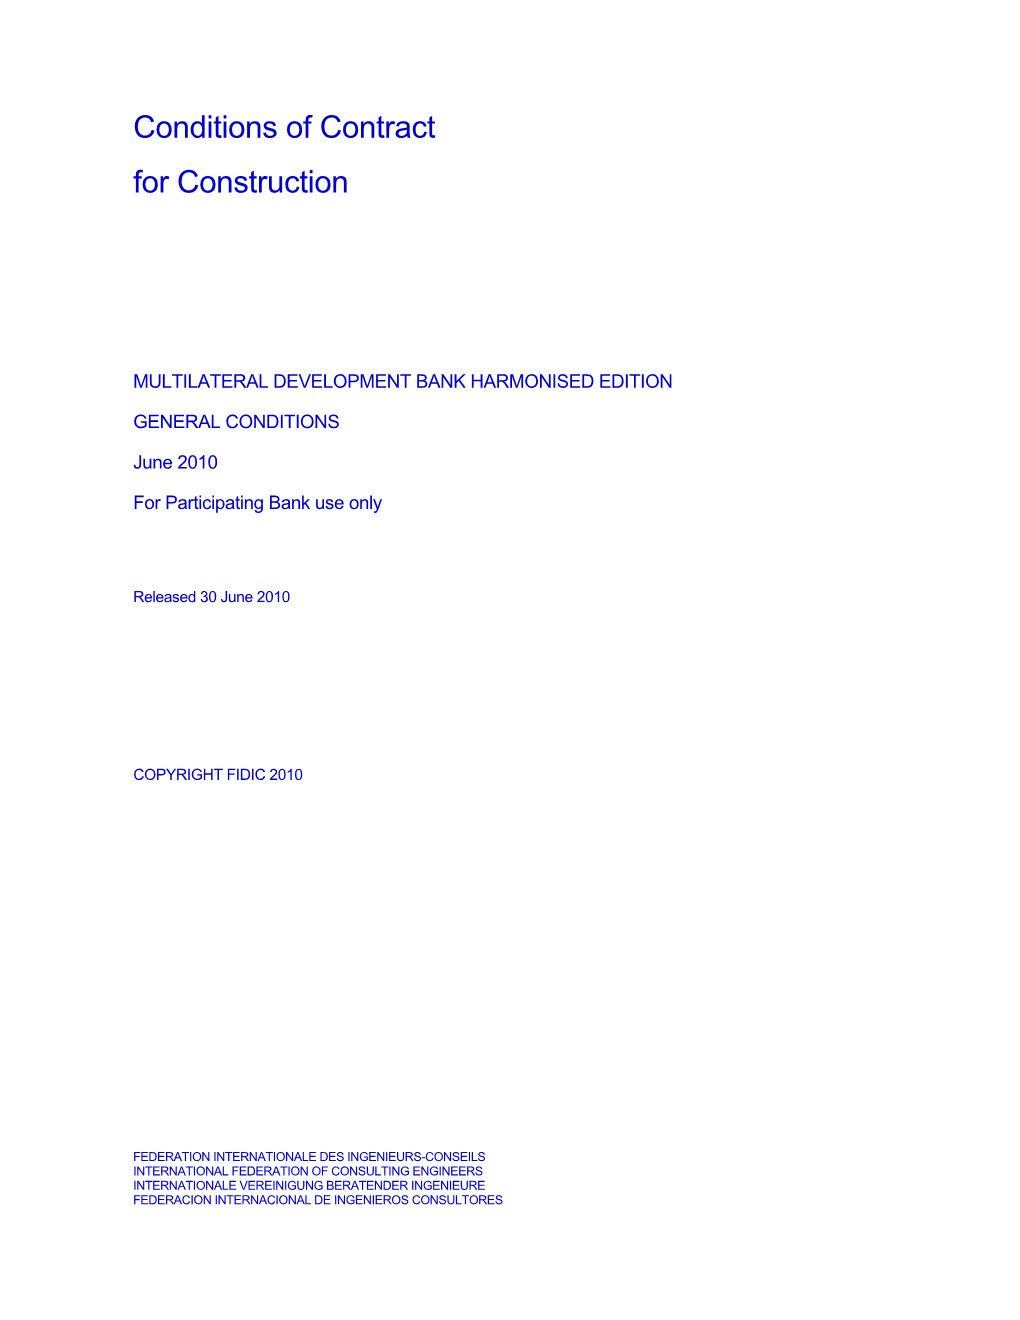 Conditions of Contract for Construction